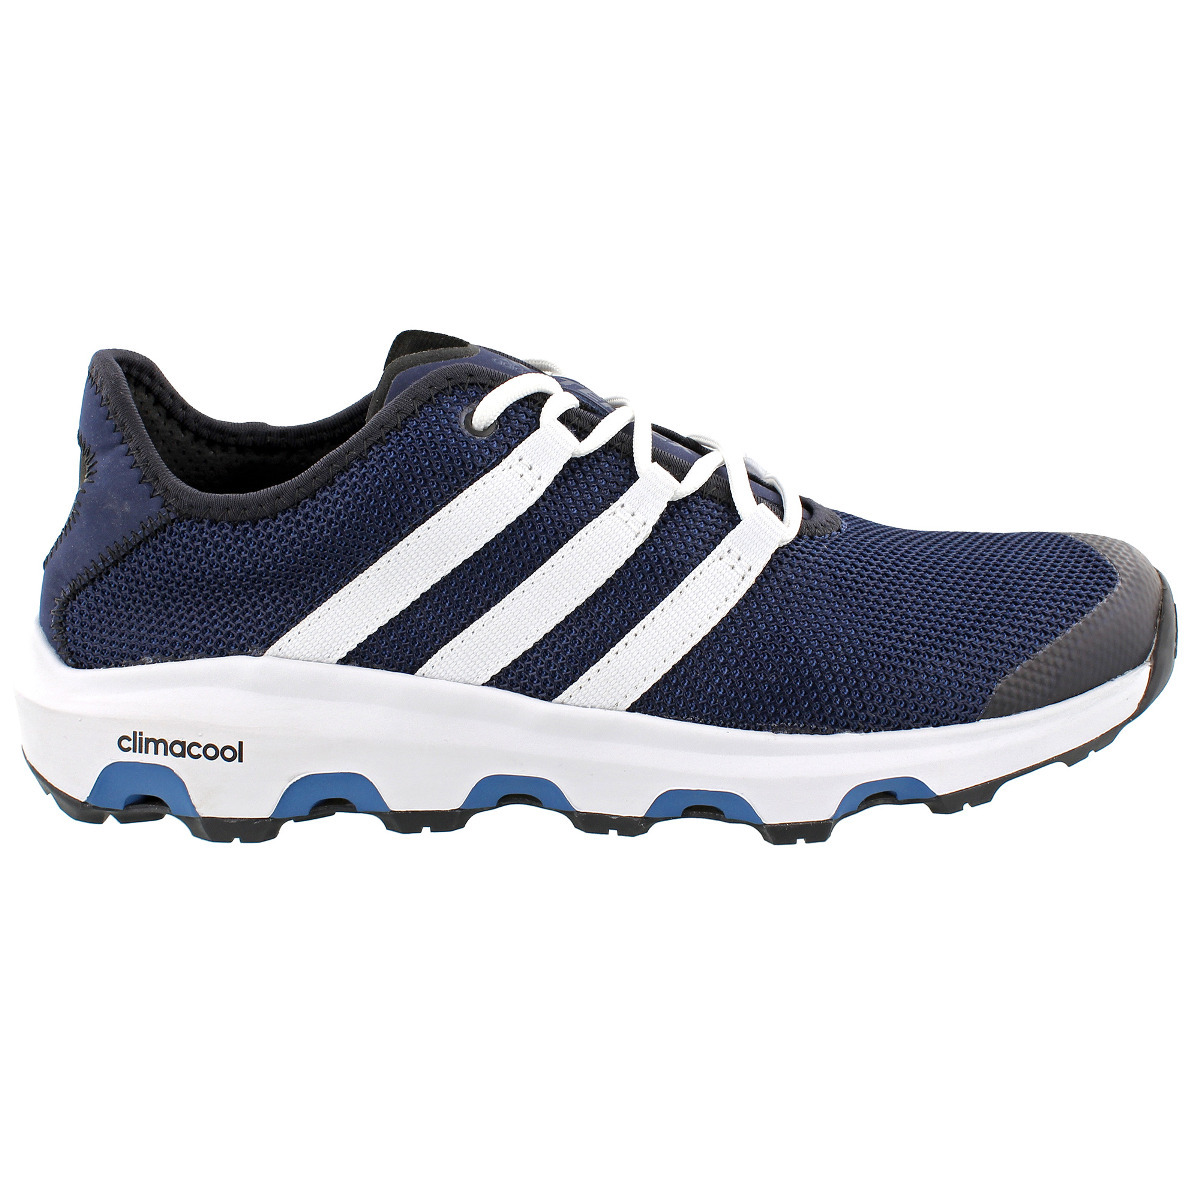 adidas men's climacool voyager water shoes